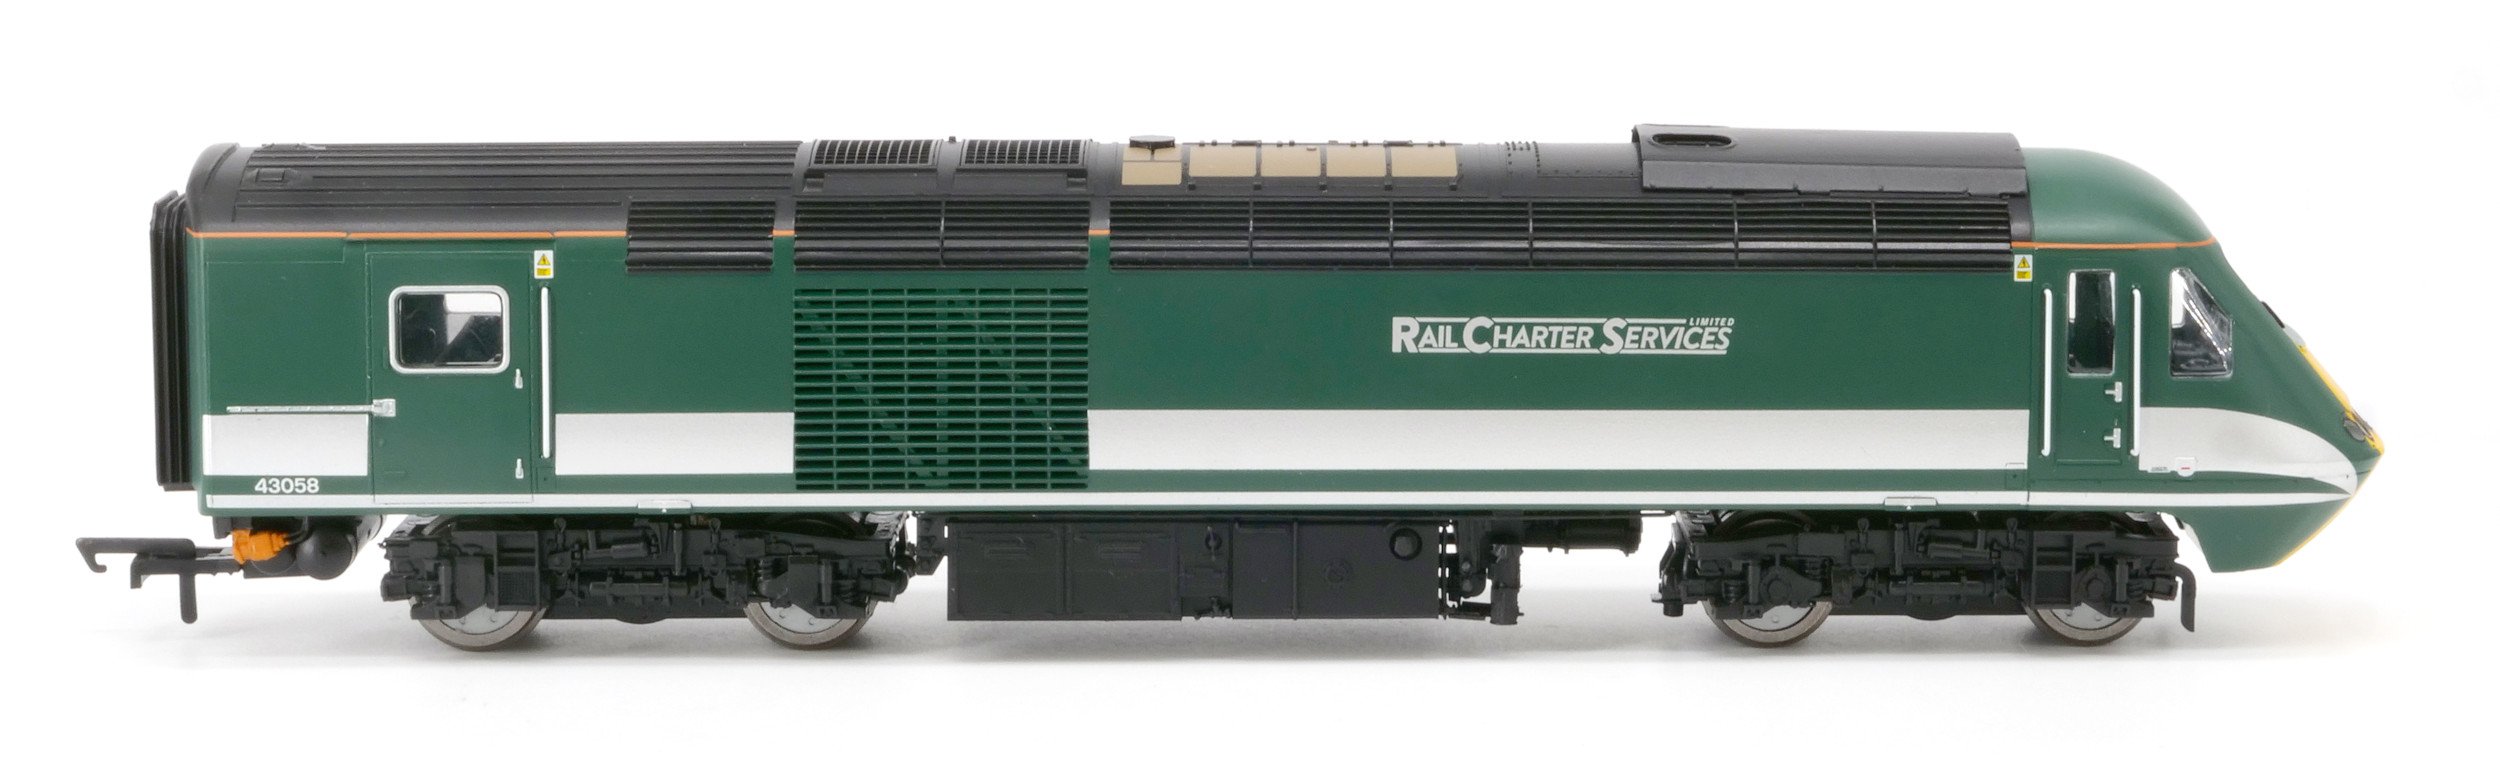 43058 is powered and has a full suite of internal components covering a five-pole motor with twin flywheels, 21-pin decoder socket, directional lighting, twin speakers and a powered roof fan.